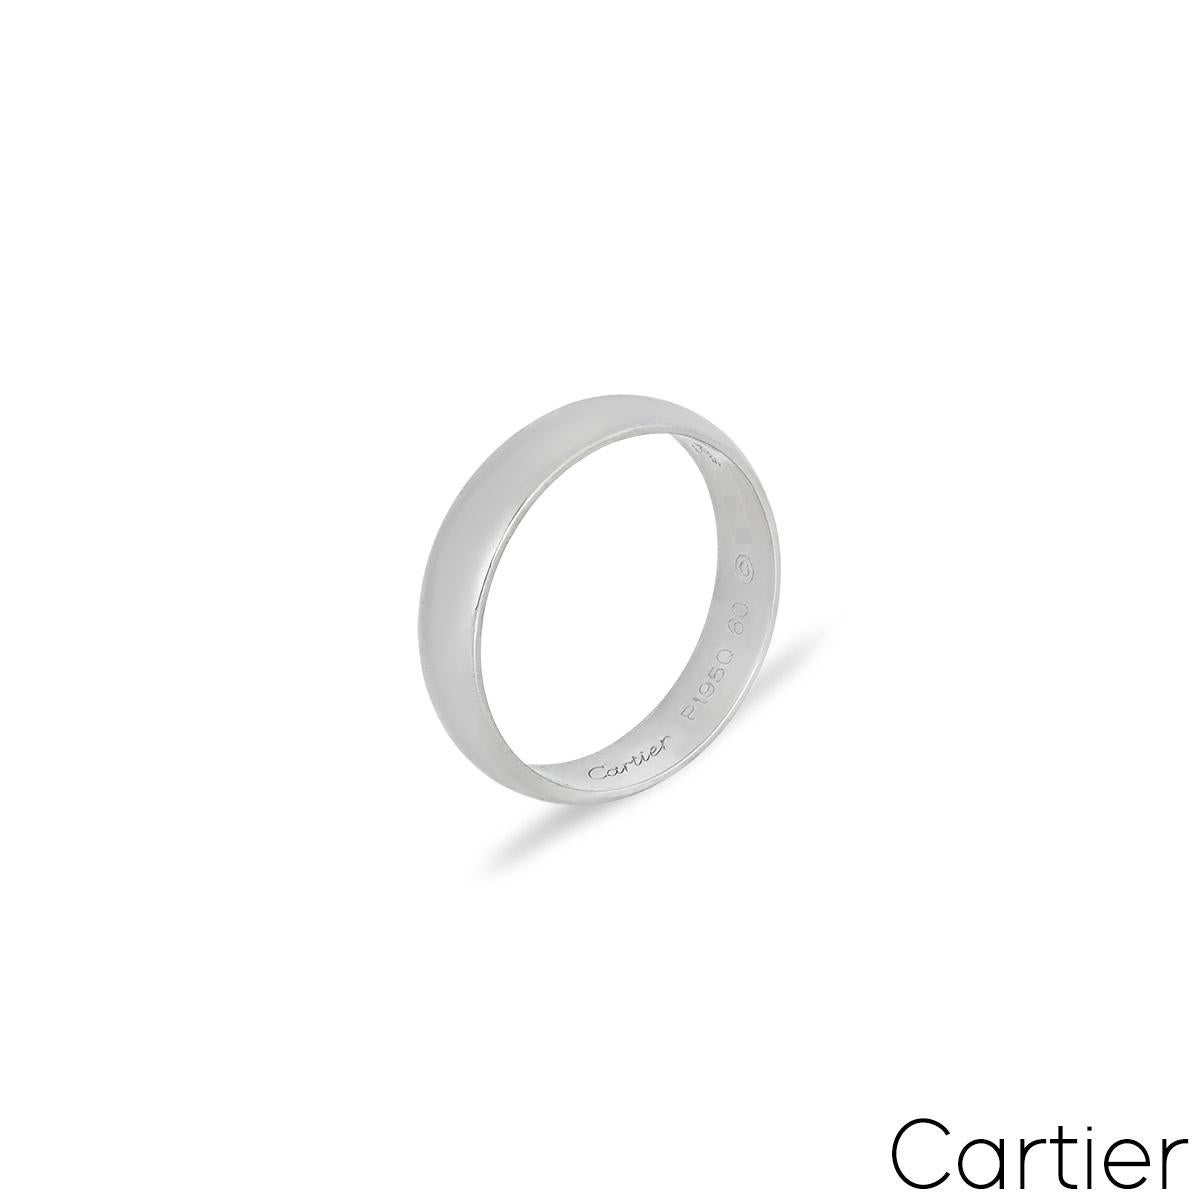 A plain platinum wedding band by Cartier from the 1895 collection. The 5mm ring has a high polish finish, is a UK size S/ US size 9/ EU size 60 and has a gross weight of 7.00 grams.

Comes complete with a RichDiamonds presentation box and Cartier